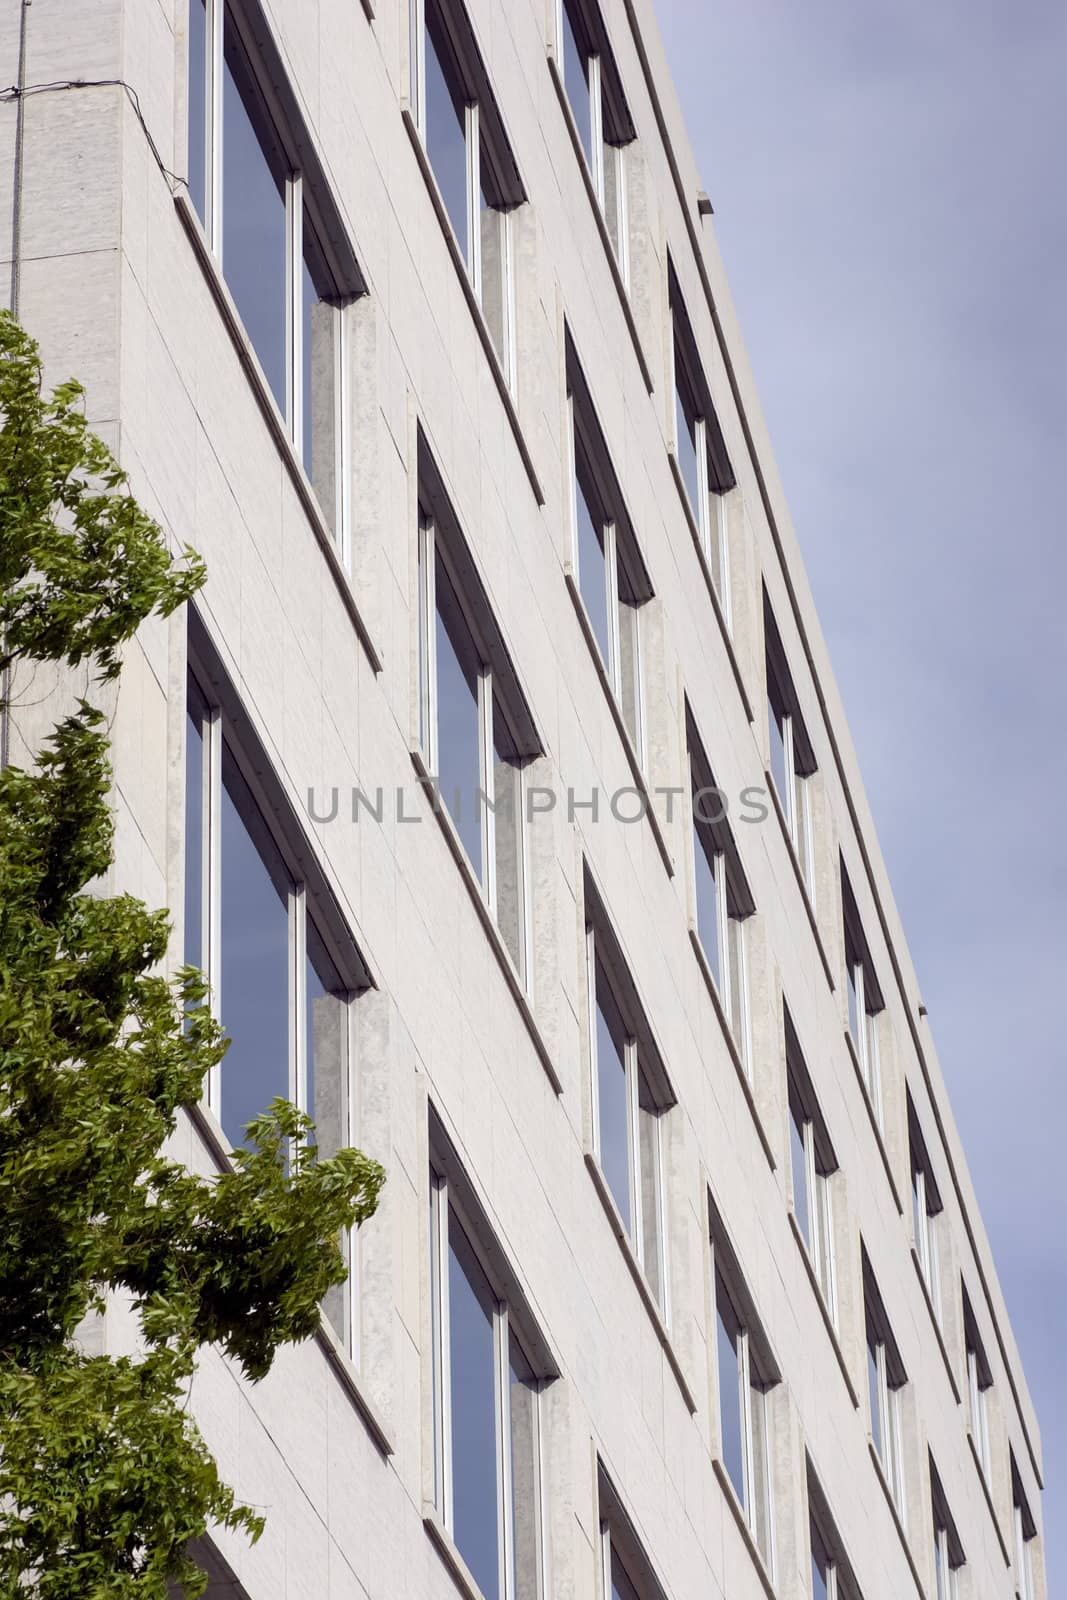 An angled view of a concrete office building.